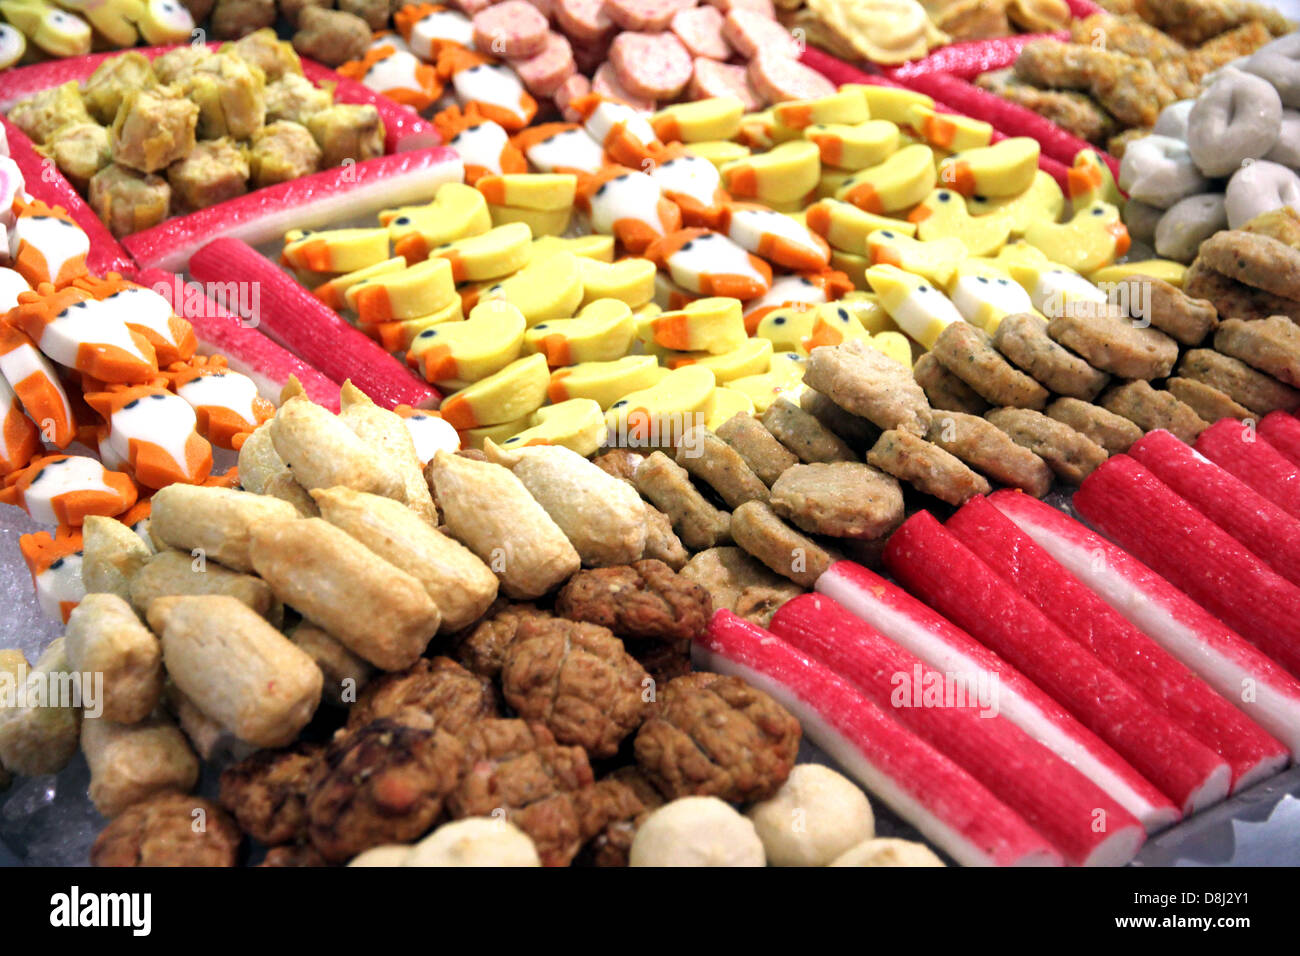 Meatball-shaped variety of Asian foods. Stock Photo